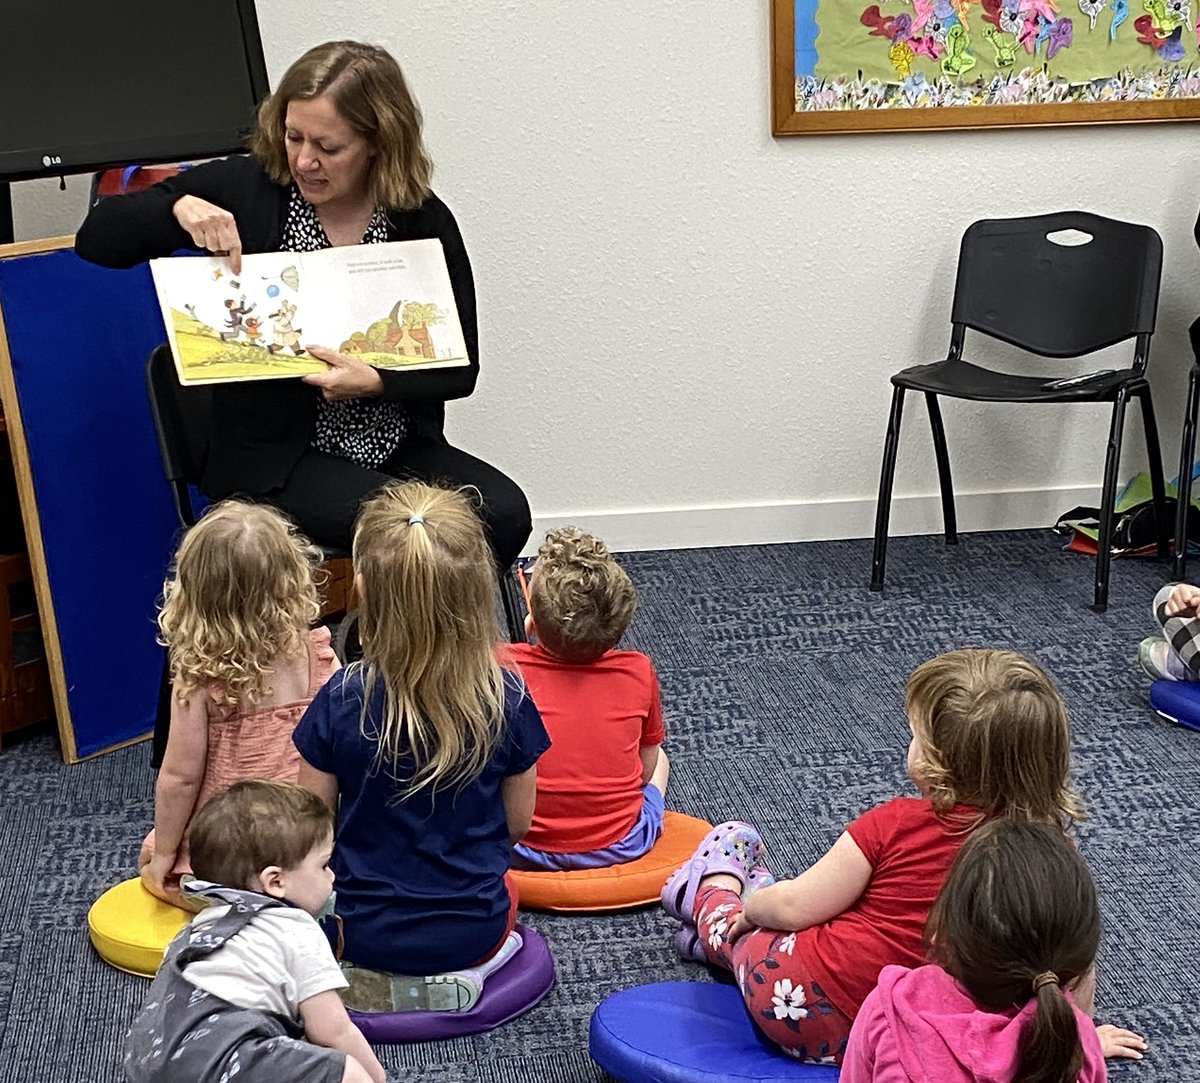 We are enjoying spring days at the library! Last week Ms. Cymre read about insects. This week Mrs. Kim read about wind. Next week we will be outside for messy toddler day!

#earlyliteracy #CCLchildrensclass #EducateEngageEnrich